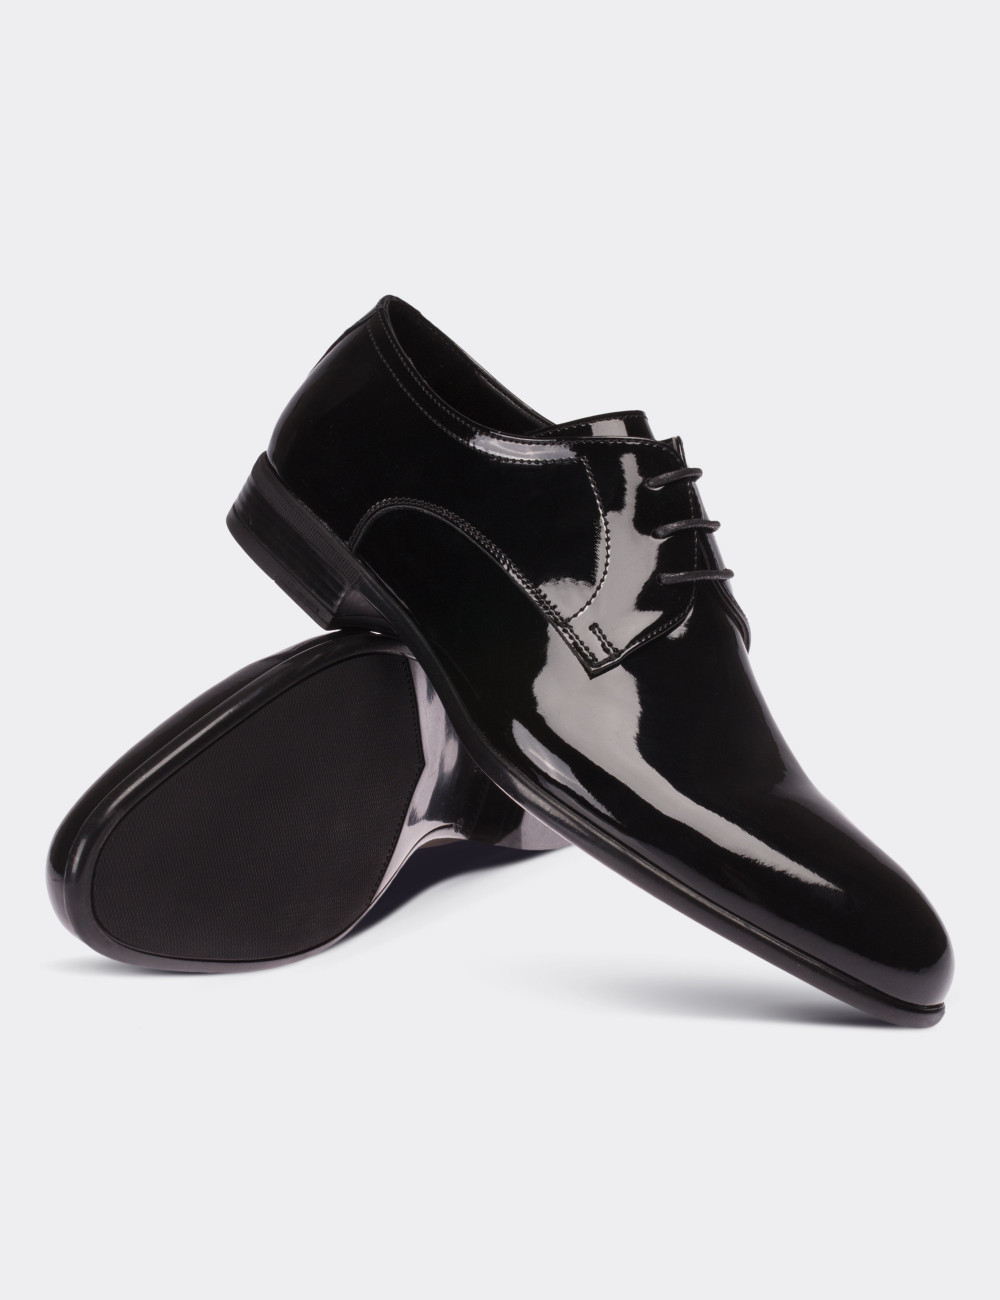 Black Patent Leather Classic Shoes - 00479MSYHC02